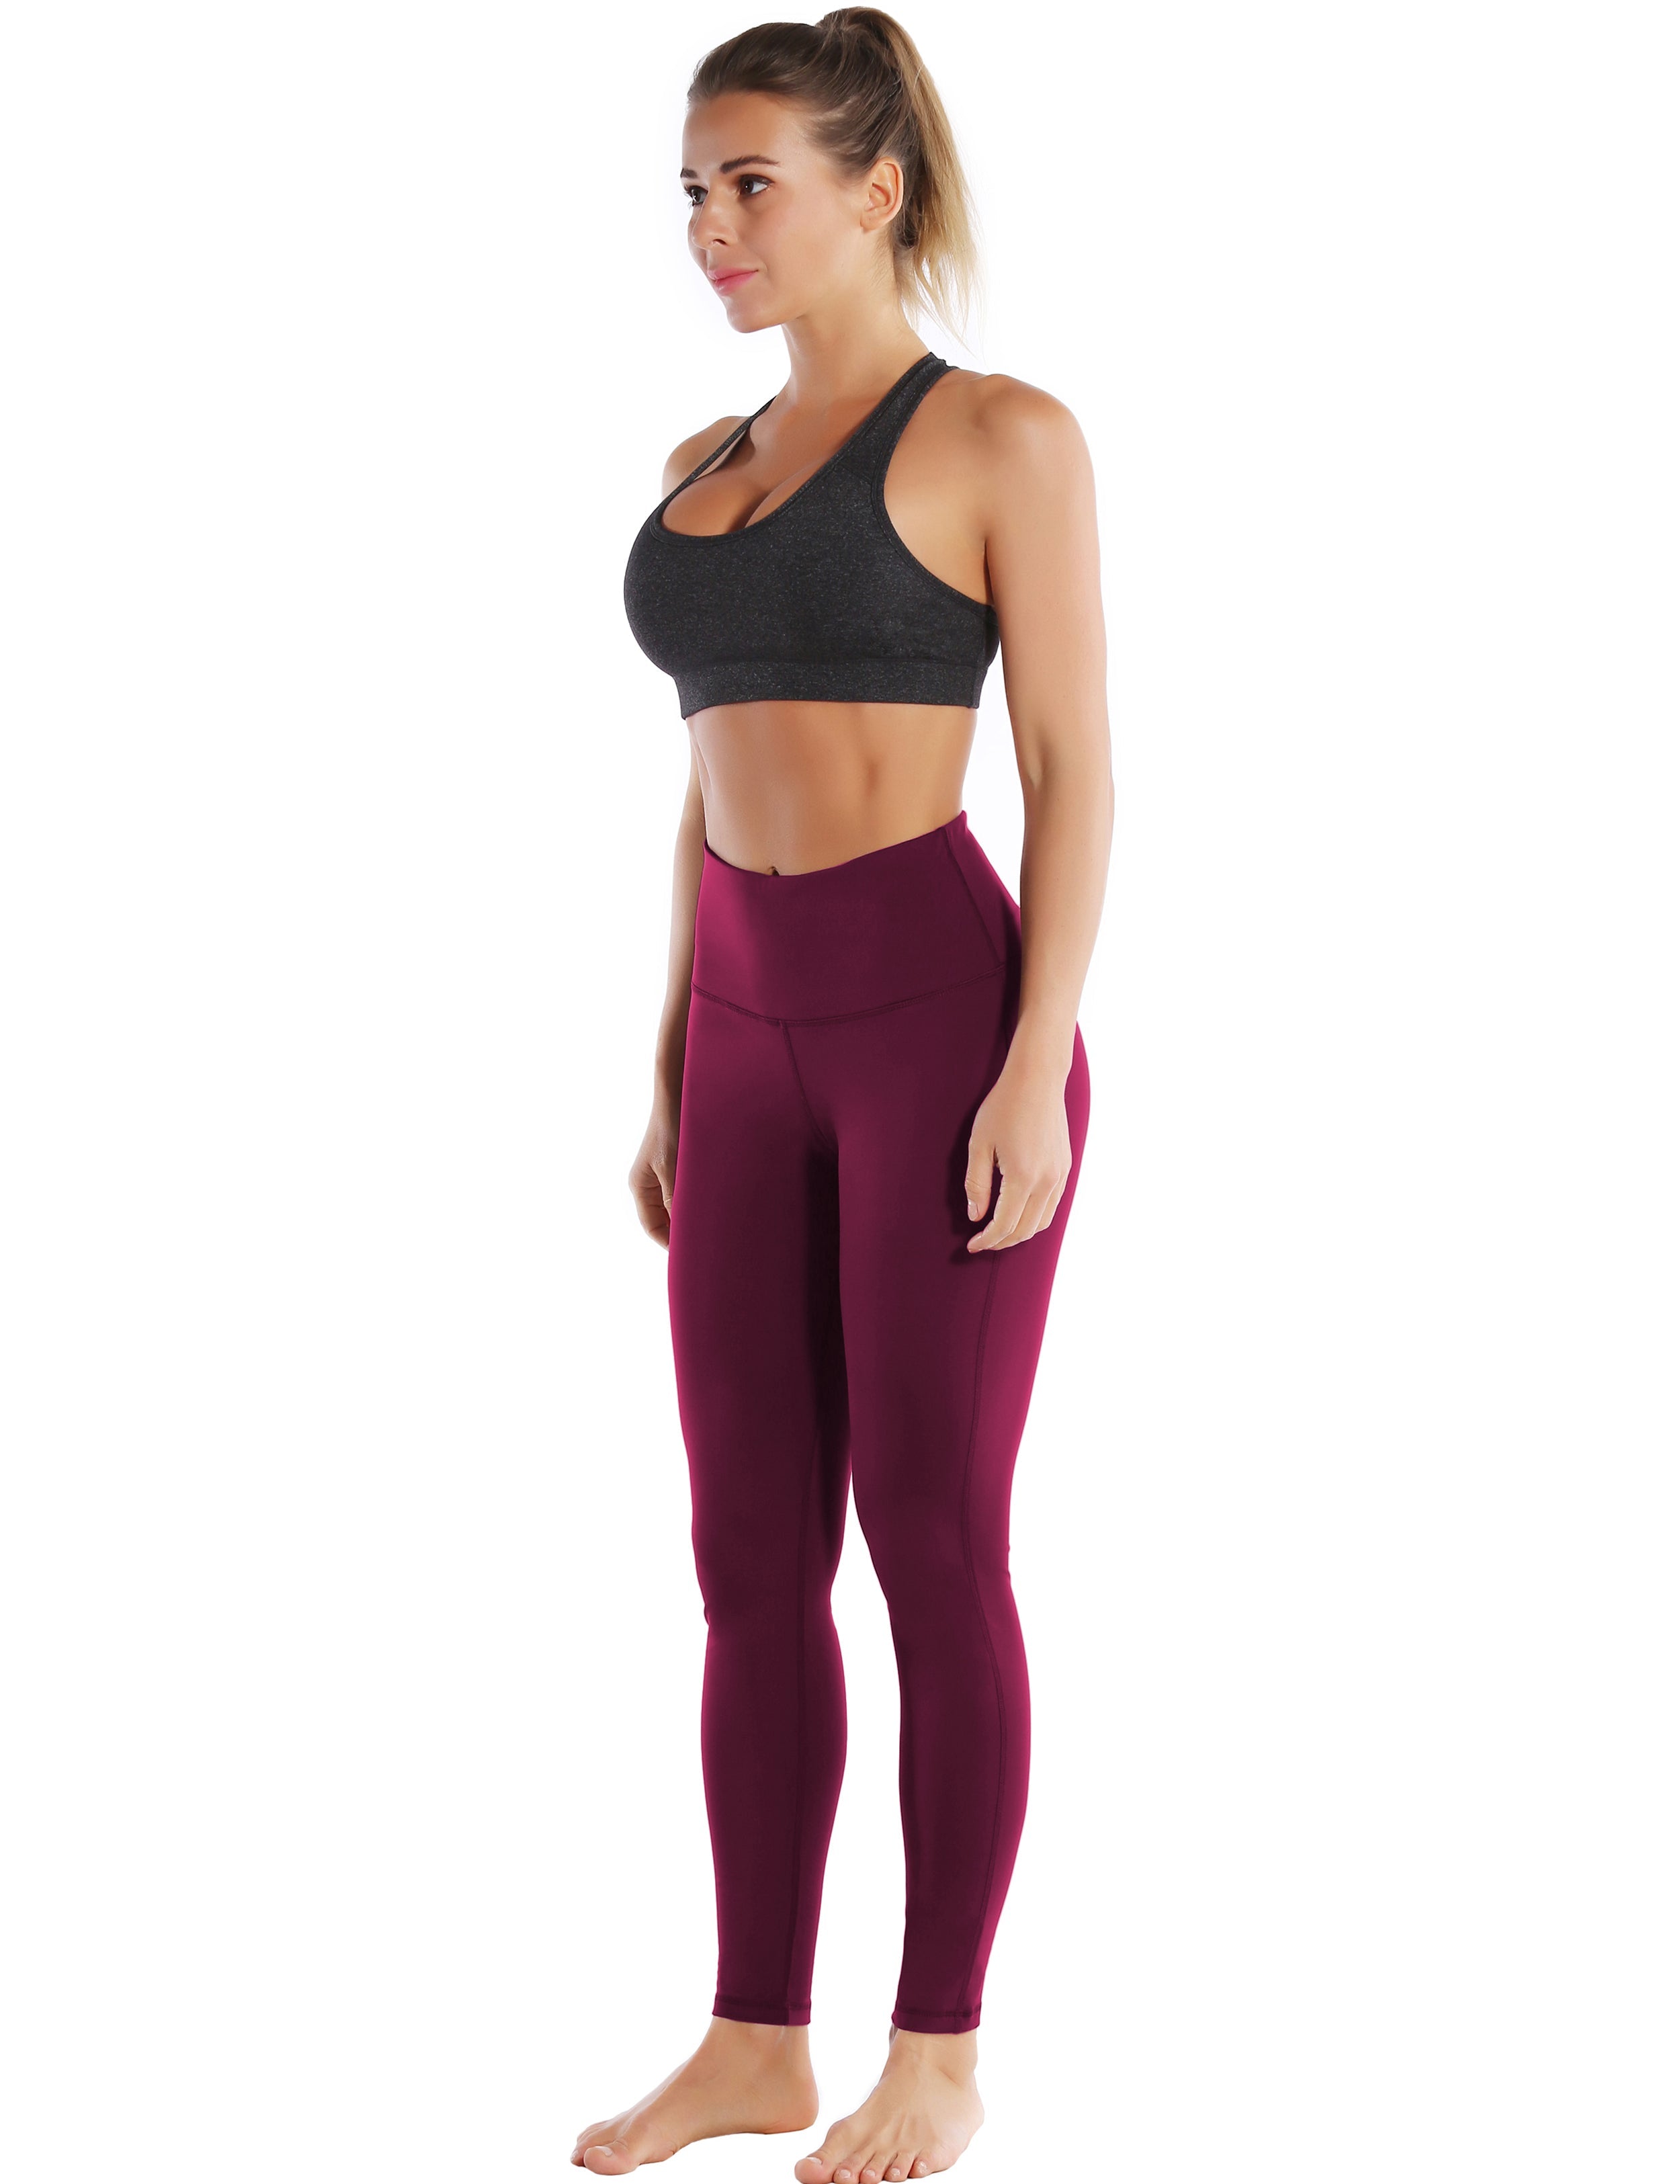 High Waist Side Line Jogging Pants grapevine Side Line is Make Your Legs Look Longer and Thinner 75%Nylon/25%Spandex Fabric doesn't attract lint easily 4-way stretch No see-through Moisture-wicking Tummy control Inner pocket Two lengths